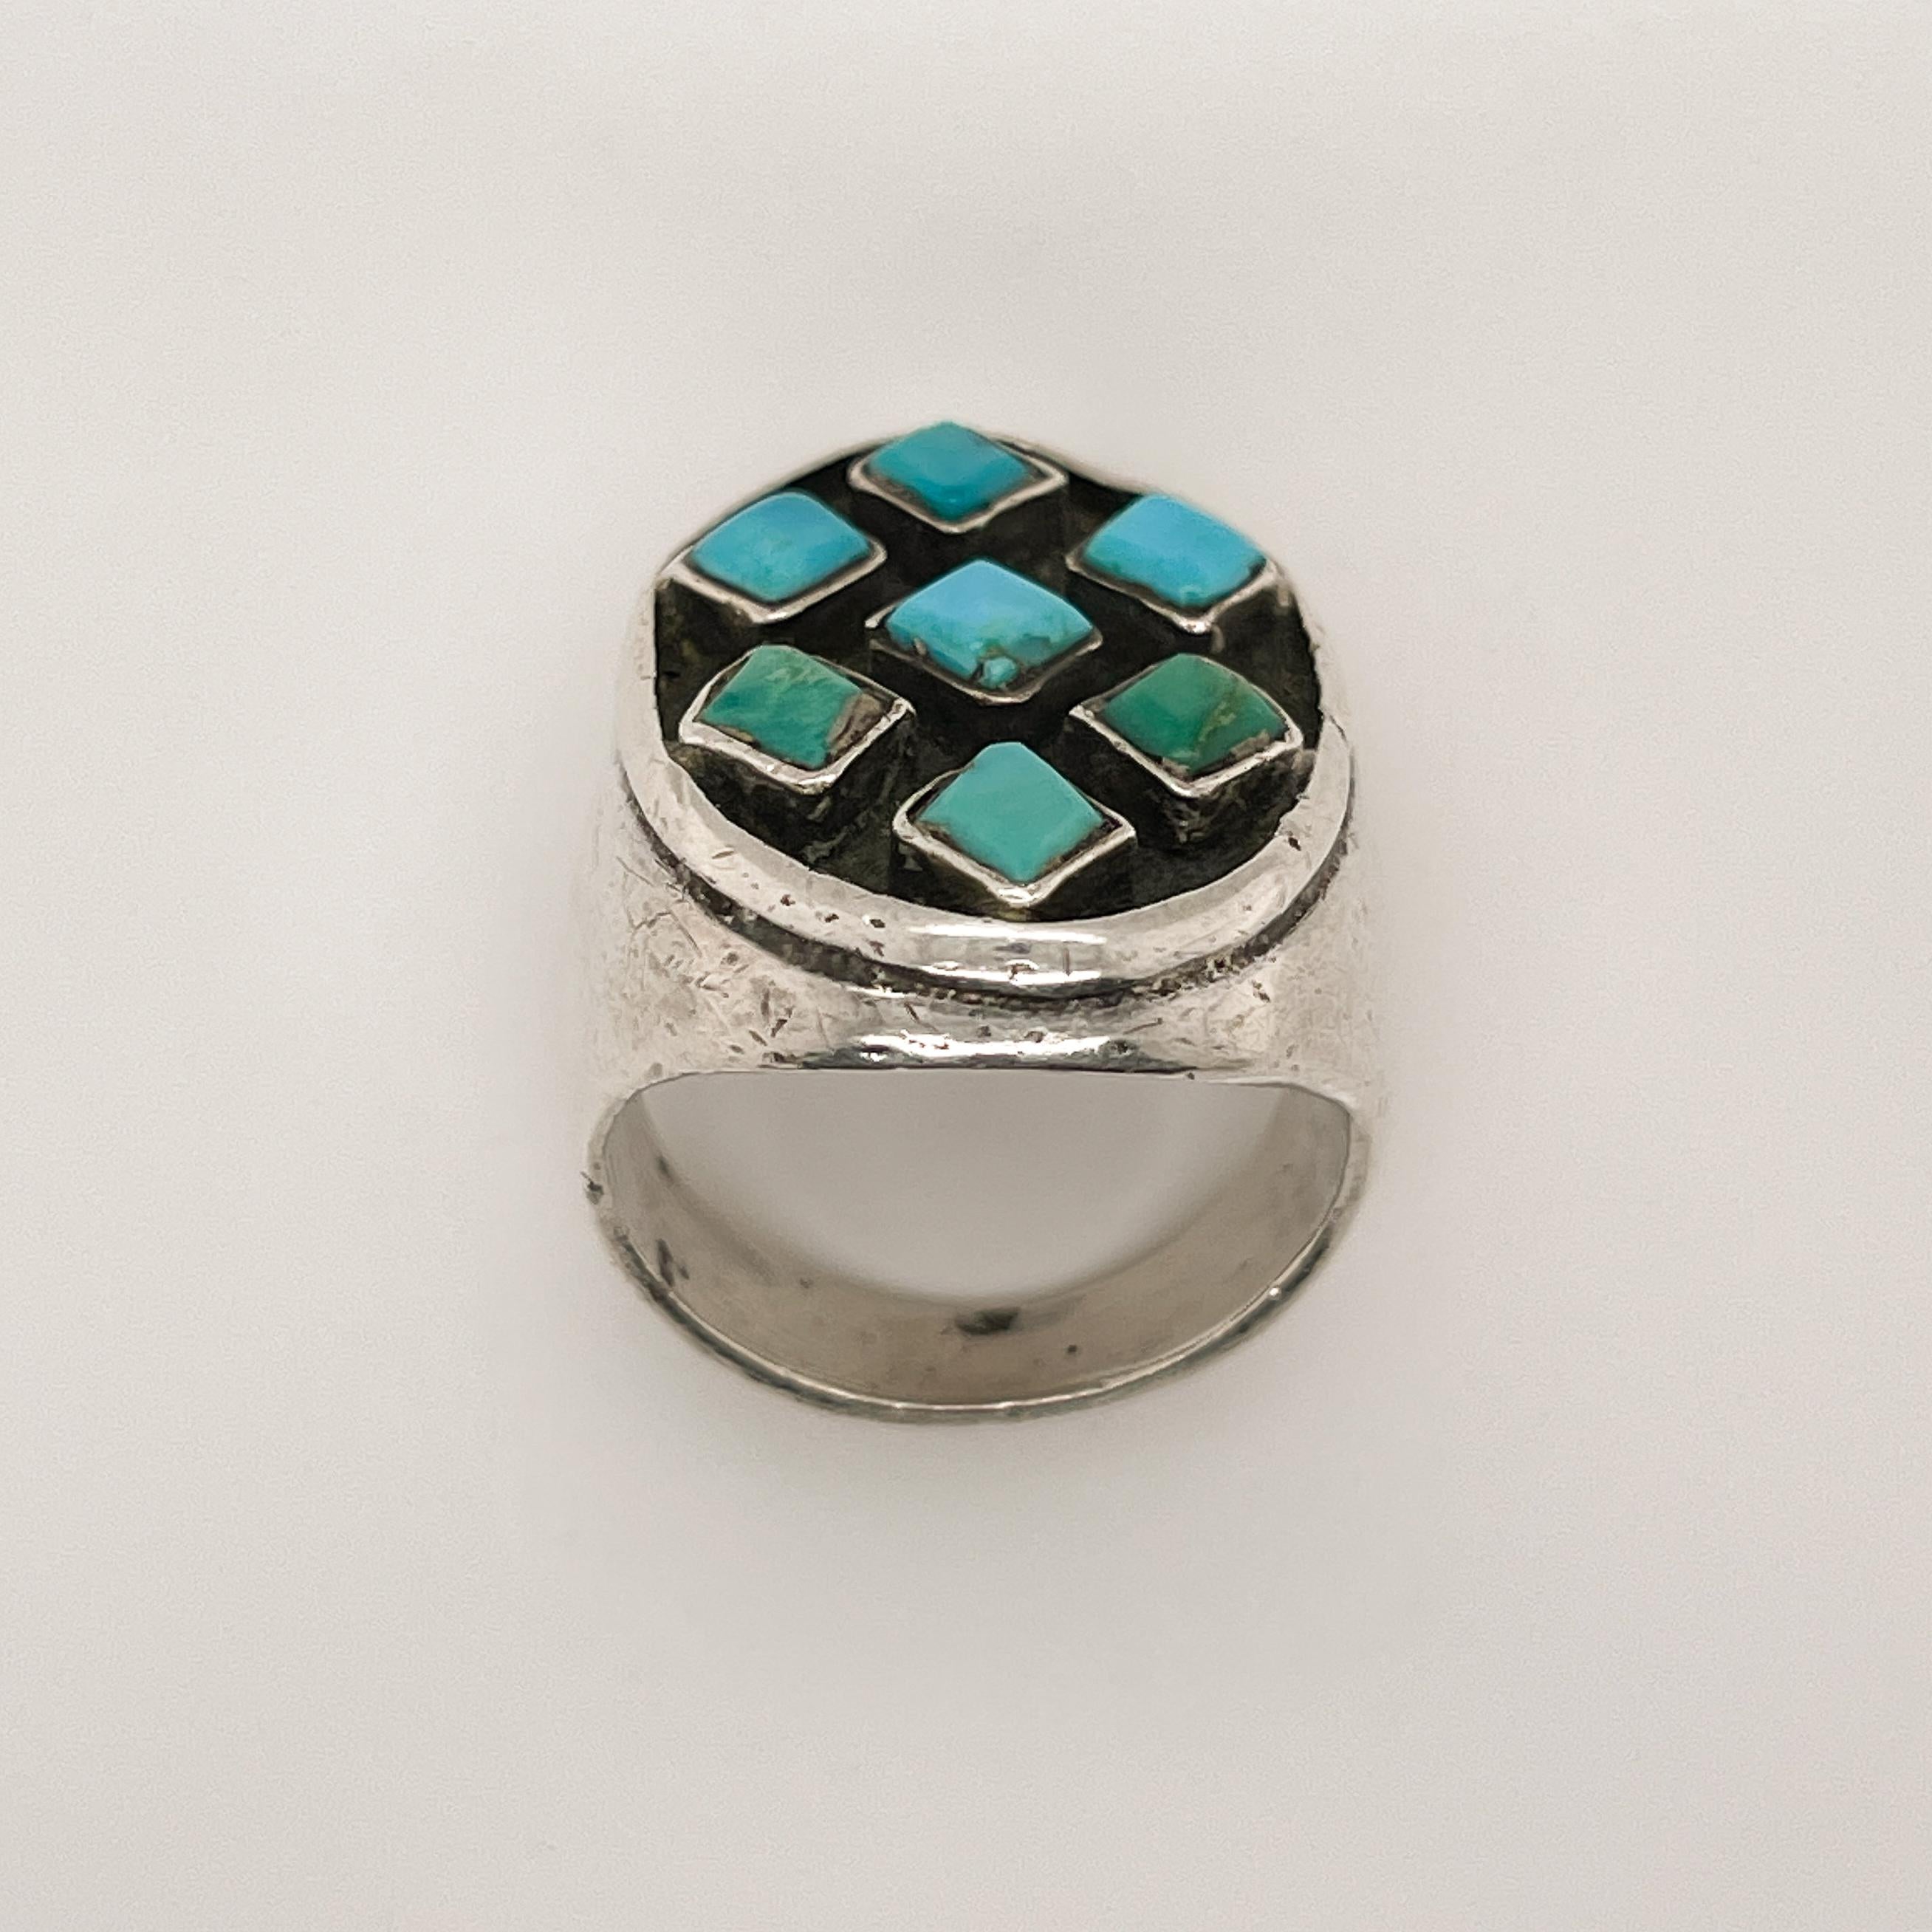 Cabochon Heavy Vintage Old Pawn Navajo Sterling Silver and Turquoise Ring